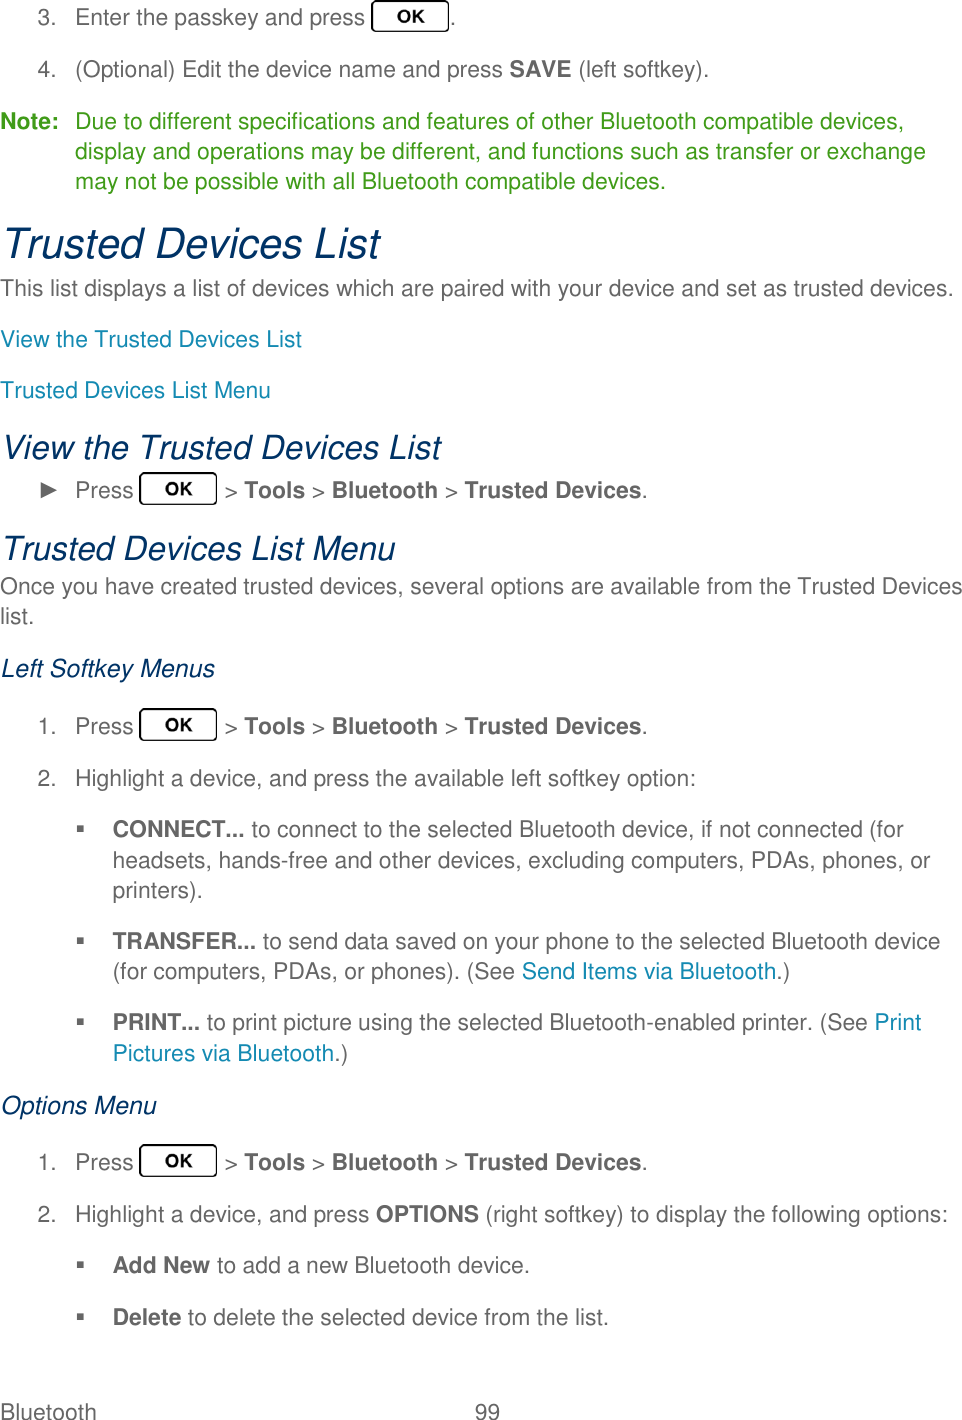 Bluetooth  99   3.  Enter the passkey and press  . 4.  (Optional) Edit the device name and press SAVE (left softkey). Note:  Due to different specifications and features of other Bluetooth compatible devices, display and operations may be different, and functions such as transfer or exchange may not be possible with all Bluetooth compatible devices. Trusted Devices List This list displays a list of devices which are paired with your device and set as trusted devices. View the Trusted Devices List Trusted Devices List Menu View the Trusted Devices List ►  Press   &gt; Tools &gt; Bluetooth &gt; Trusted Devices. Trusted Devices List Menu Once you have created trusted devices, several options are available from the Trusted Devices list. Left Softkey Menus 1.  Press   &gt; Tools &gt; Bluetooth &gt; Trusted Devices. 2.  Highlight a device, and press the available left softkey option:  CONNECT... to connect to the selected Bluetooth device, if not connected (for headsets, hands-free and other devices, excluding computers, PDAs, phones, or printers).  TRANSFER... to send data saved on your phone to the selected Bluetooth device (for computers, PDAs, or phones). (See Send Items via Bluetooth.)  PRINT... to print picture using the selected Bluetooth-enabled printer. (See Print Pictures via Bluetooth.) Options Menu 1.  Press   &gt; Tools &gt; Bluetooth &gt; Trusted Devices. 2.  Highlight a device, and press OPTIONS (right softkey) to display the following options:  Add New to add a new Bluetooth device.  Delete to delete the selected device from the list. 